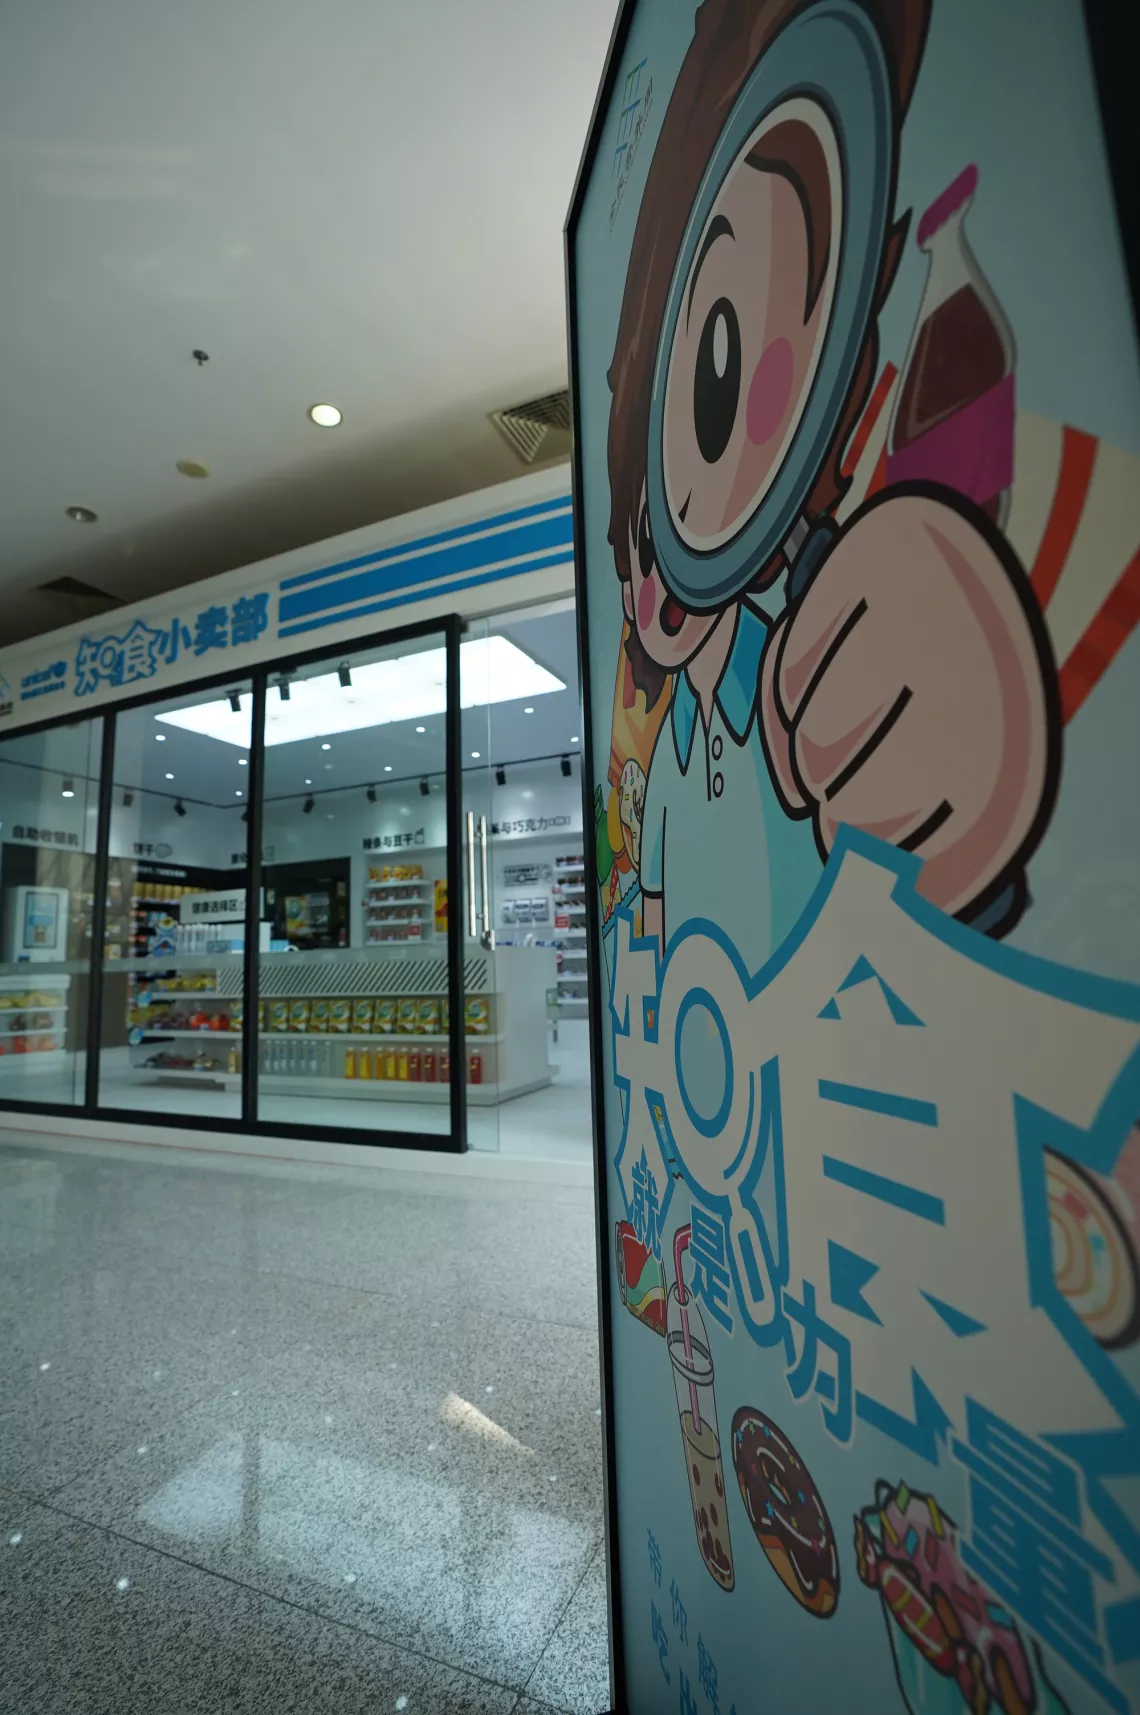 The exterior of UNICEF’s ‘Know Your Food’ Convenience Store at the Weihai Science and Technology Museum in Shandong Province.